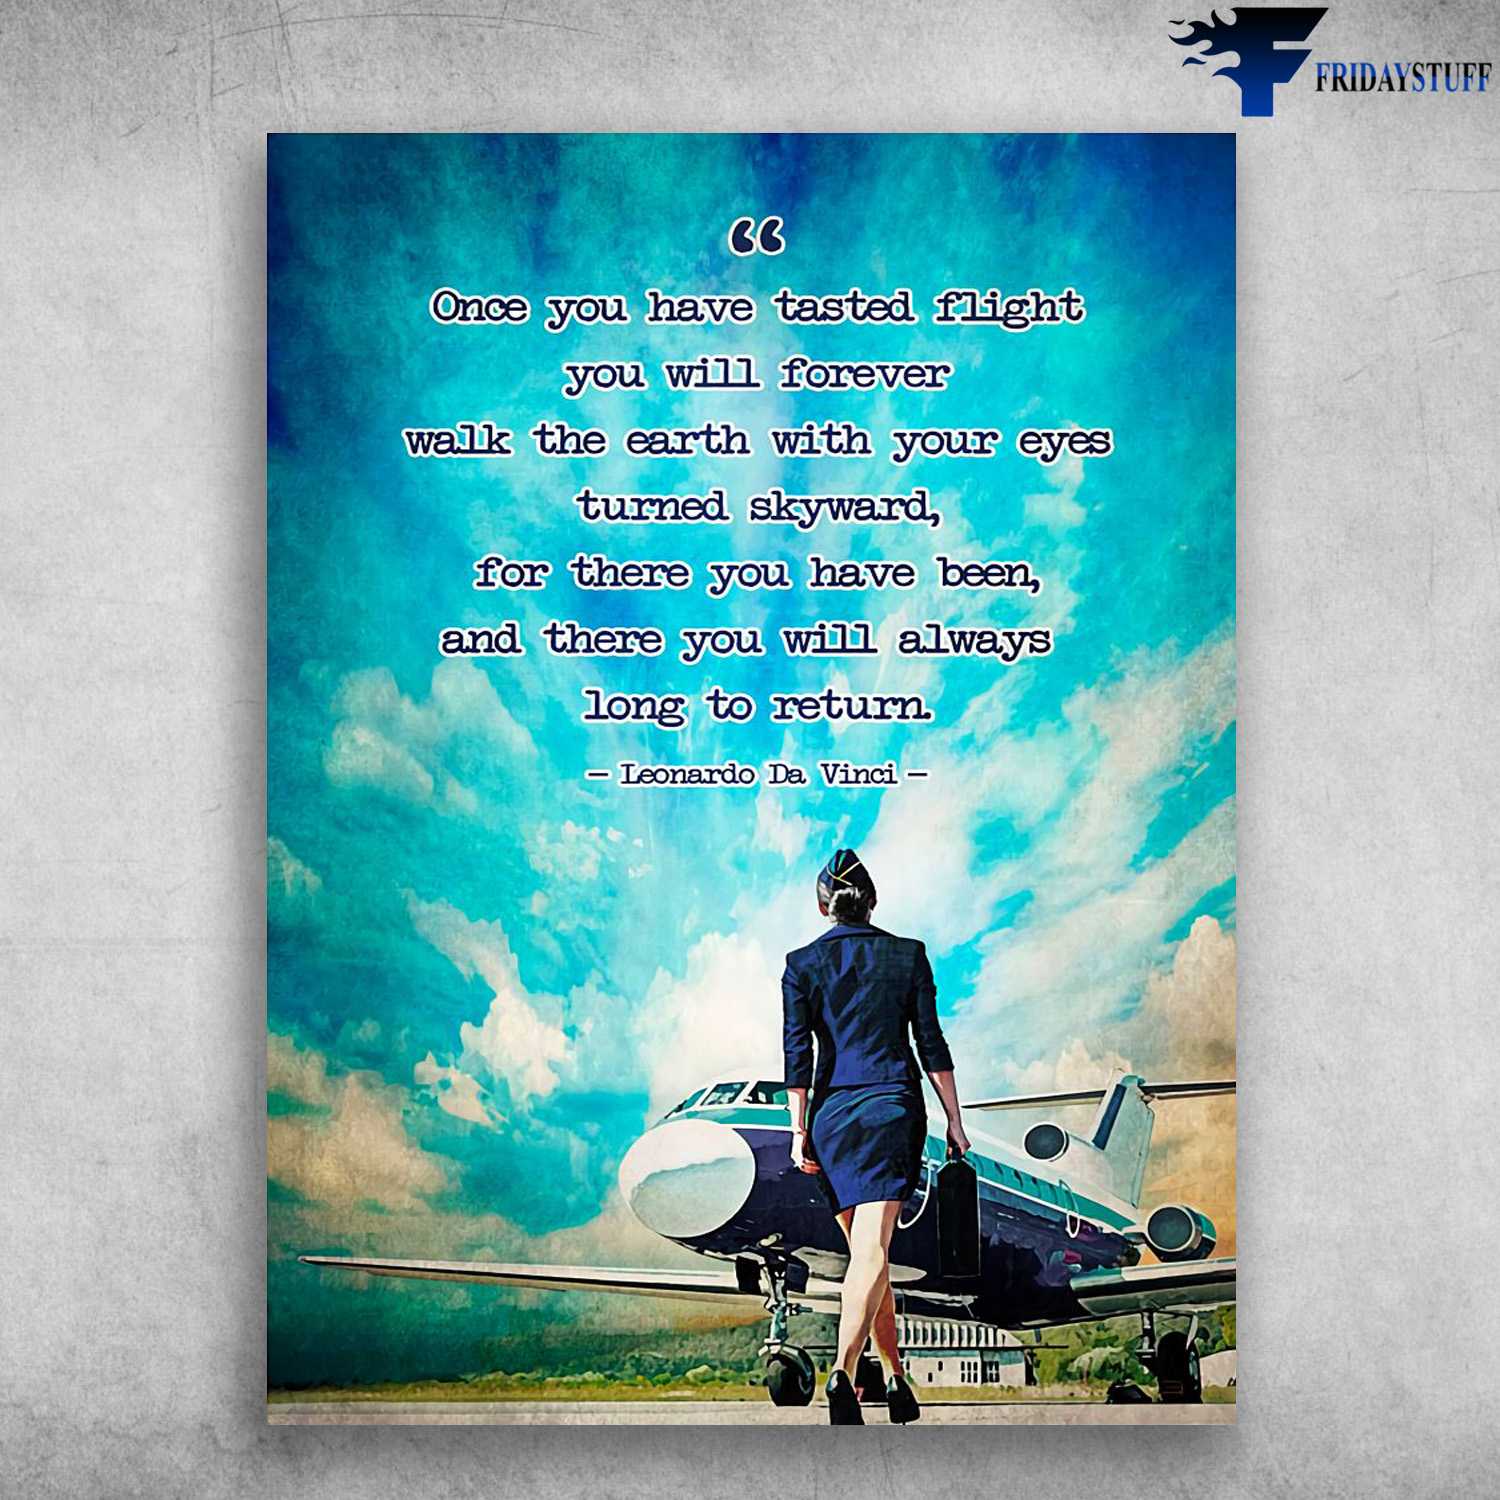 Flight Attendant, Airplane Poster - Once You Have Tasted Flight, You Will Forever, Walk The Earth With Your Eyes, Turned Skyward, For There You Have Been, And There You Will Always, Long To Return